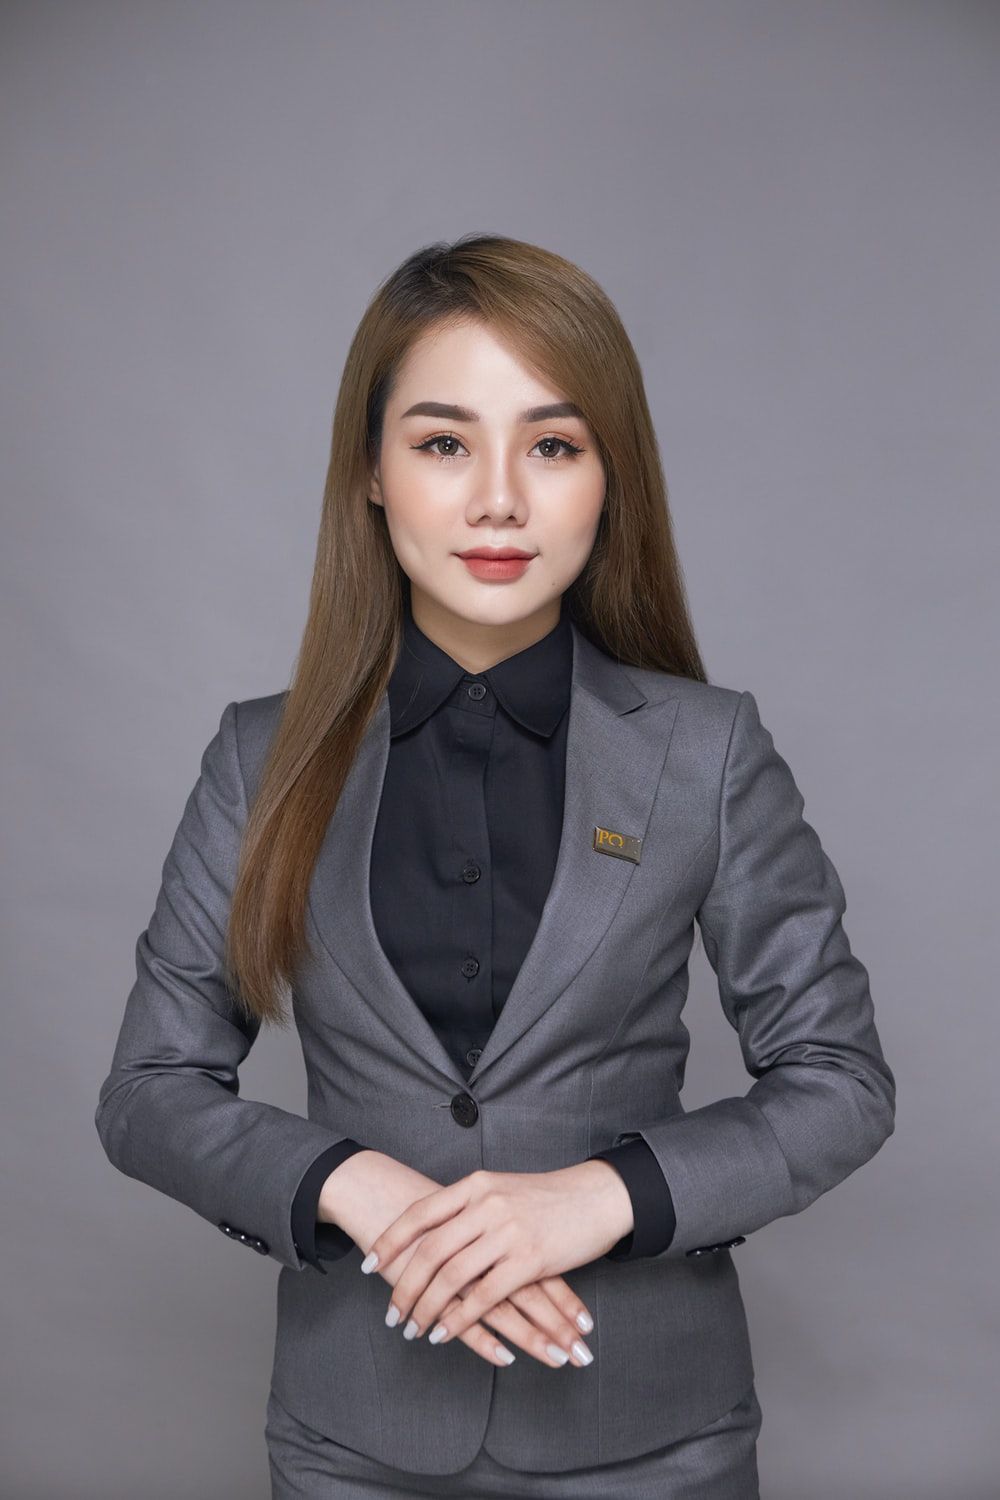 Female Suit Picture. Download Free Image